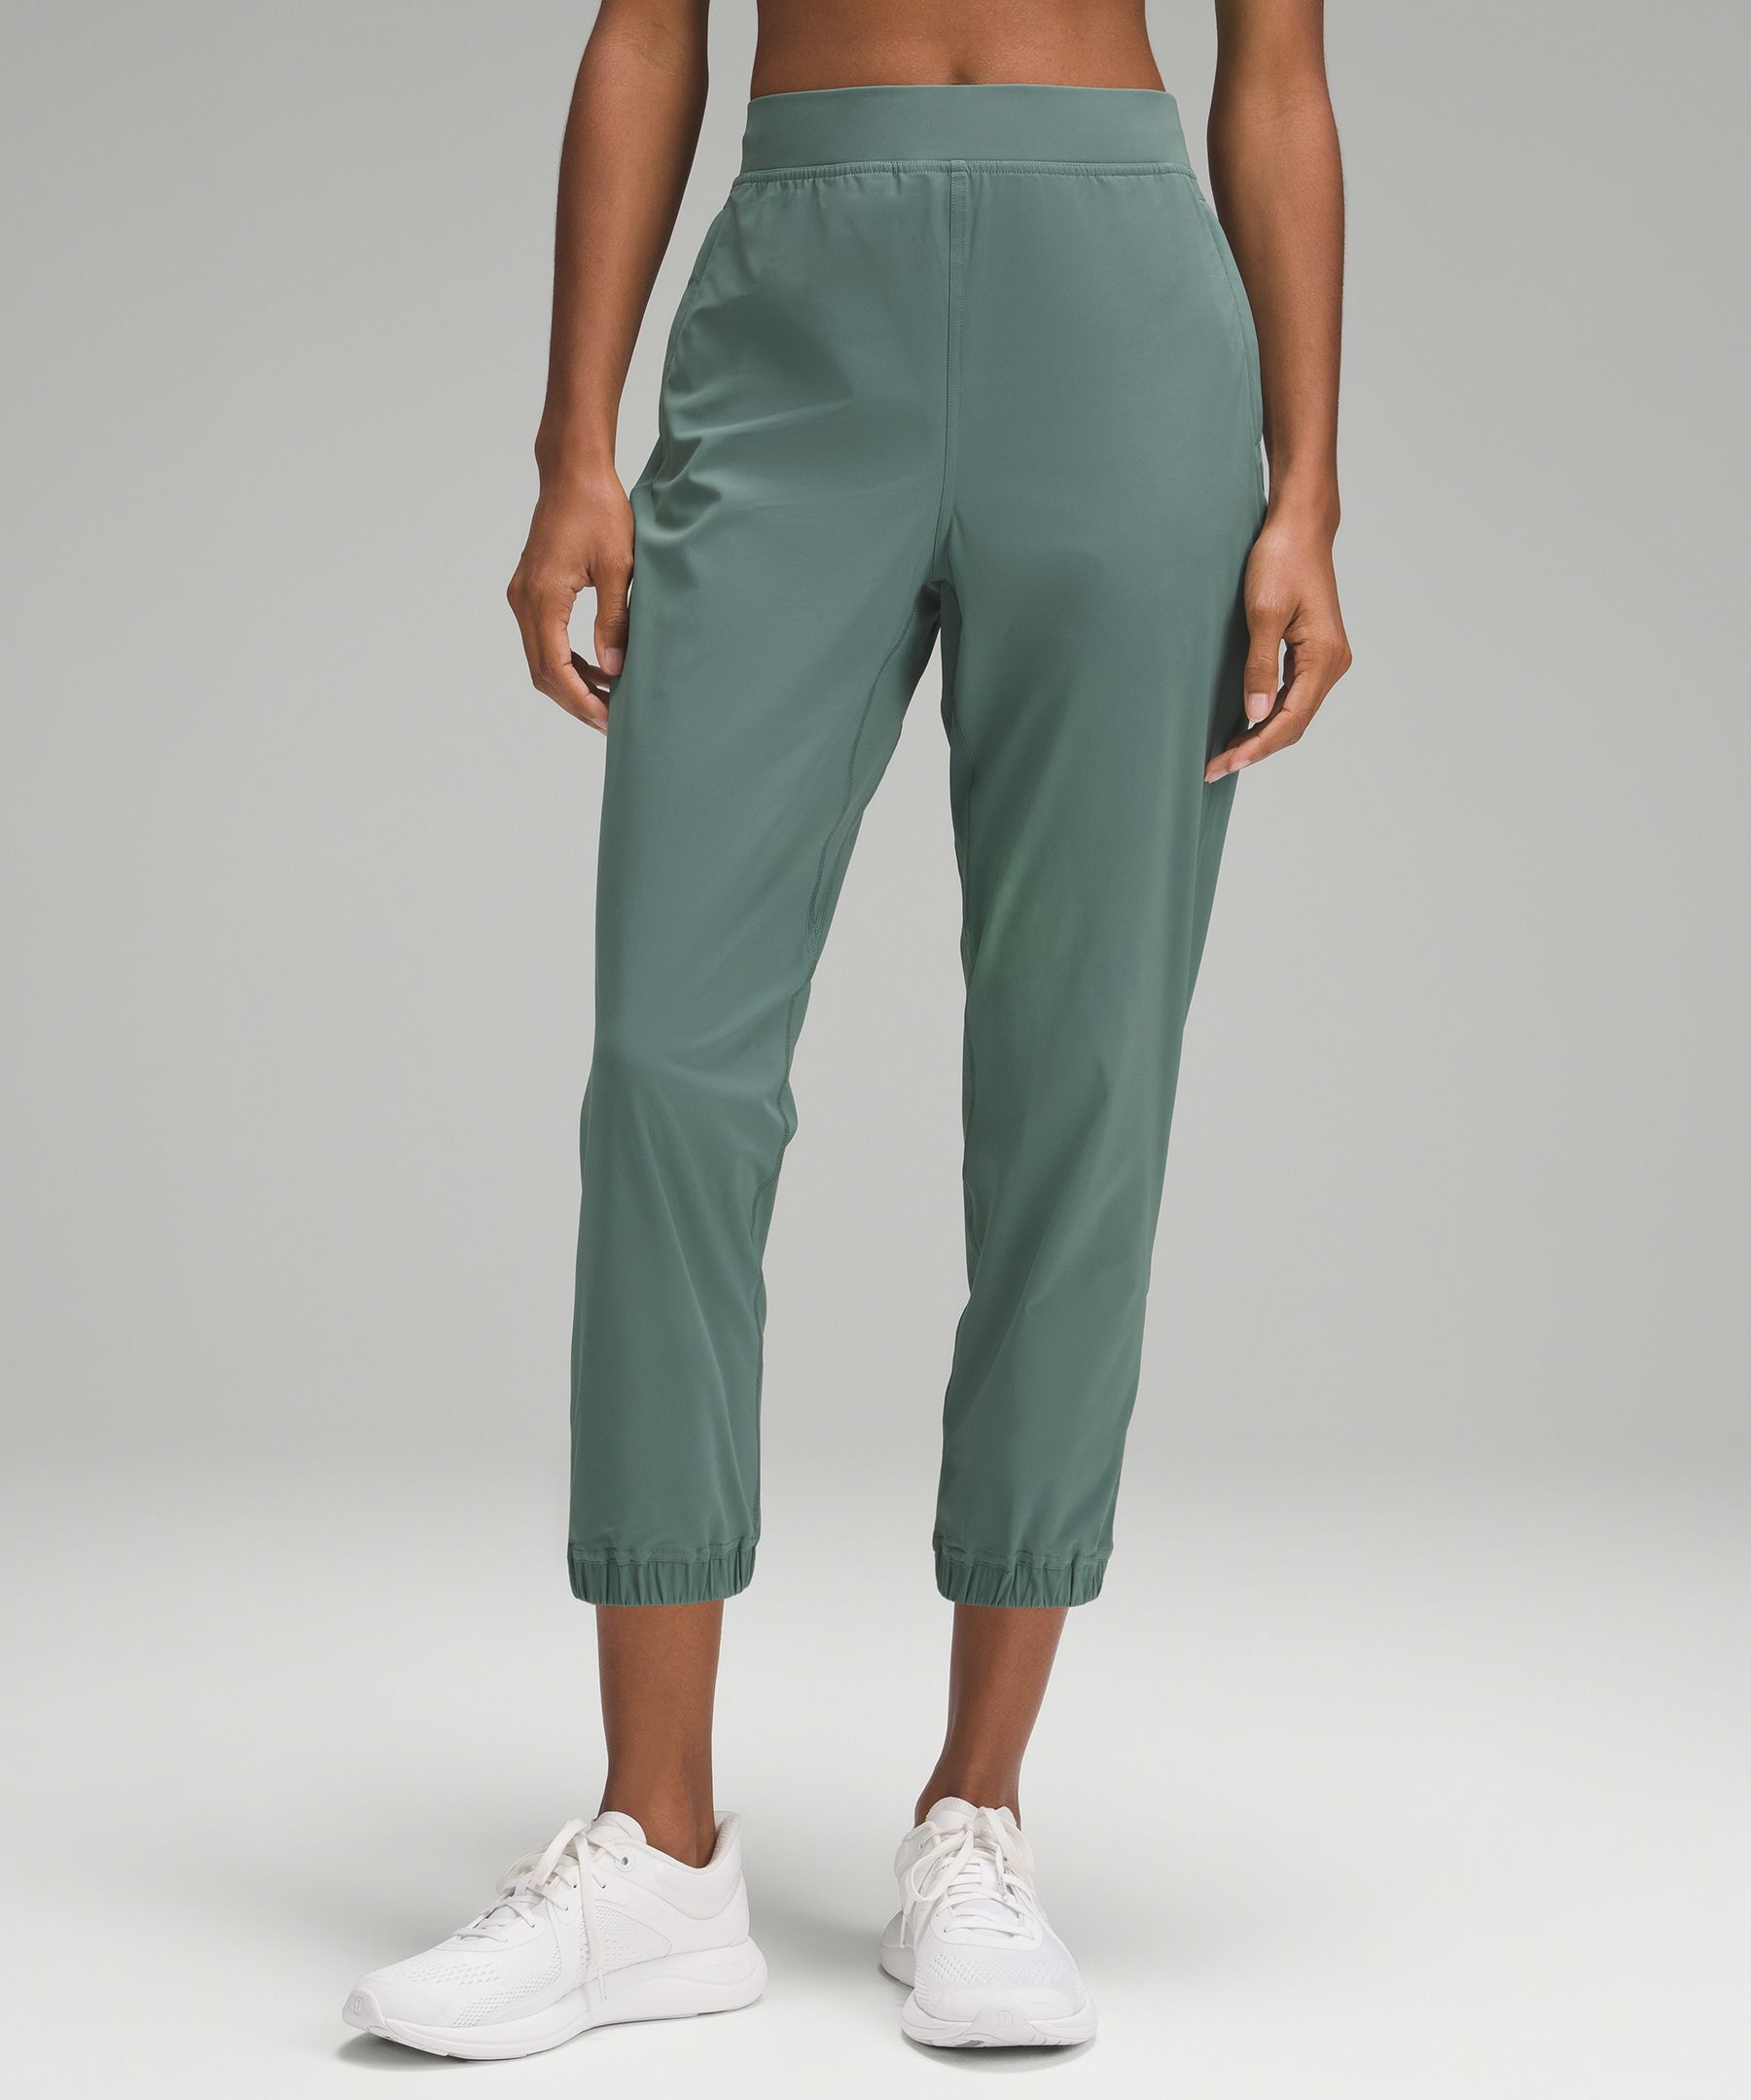 Lululemon athletica Adapted State High-Rise Cropped Jogger